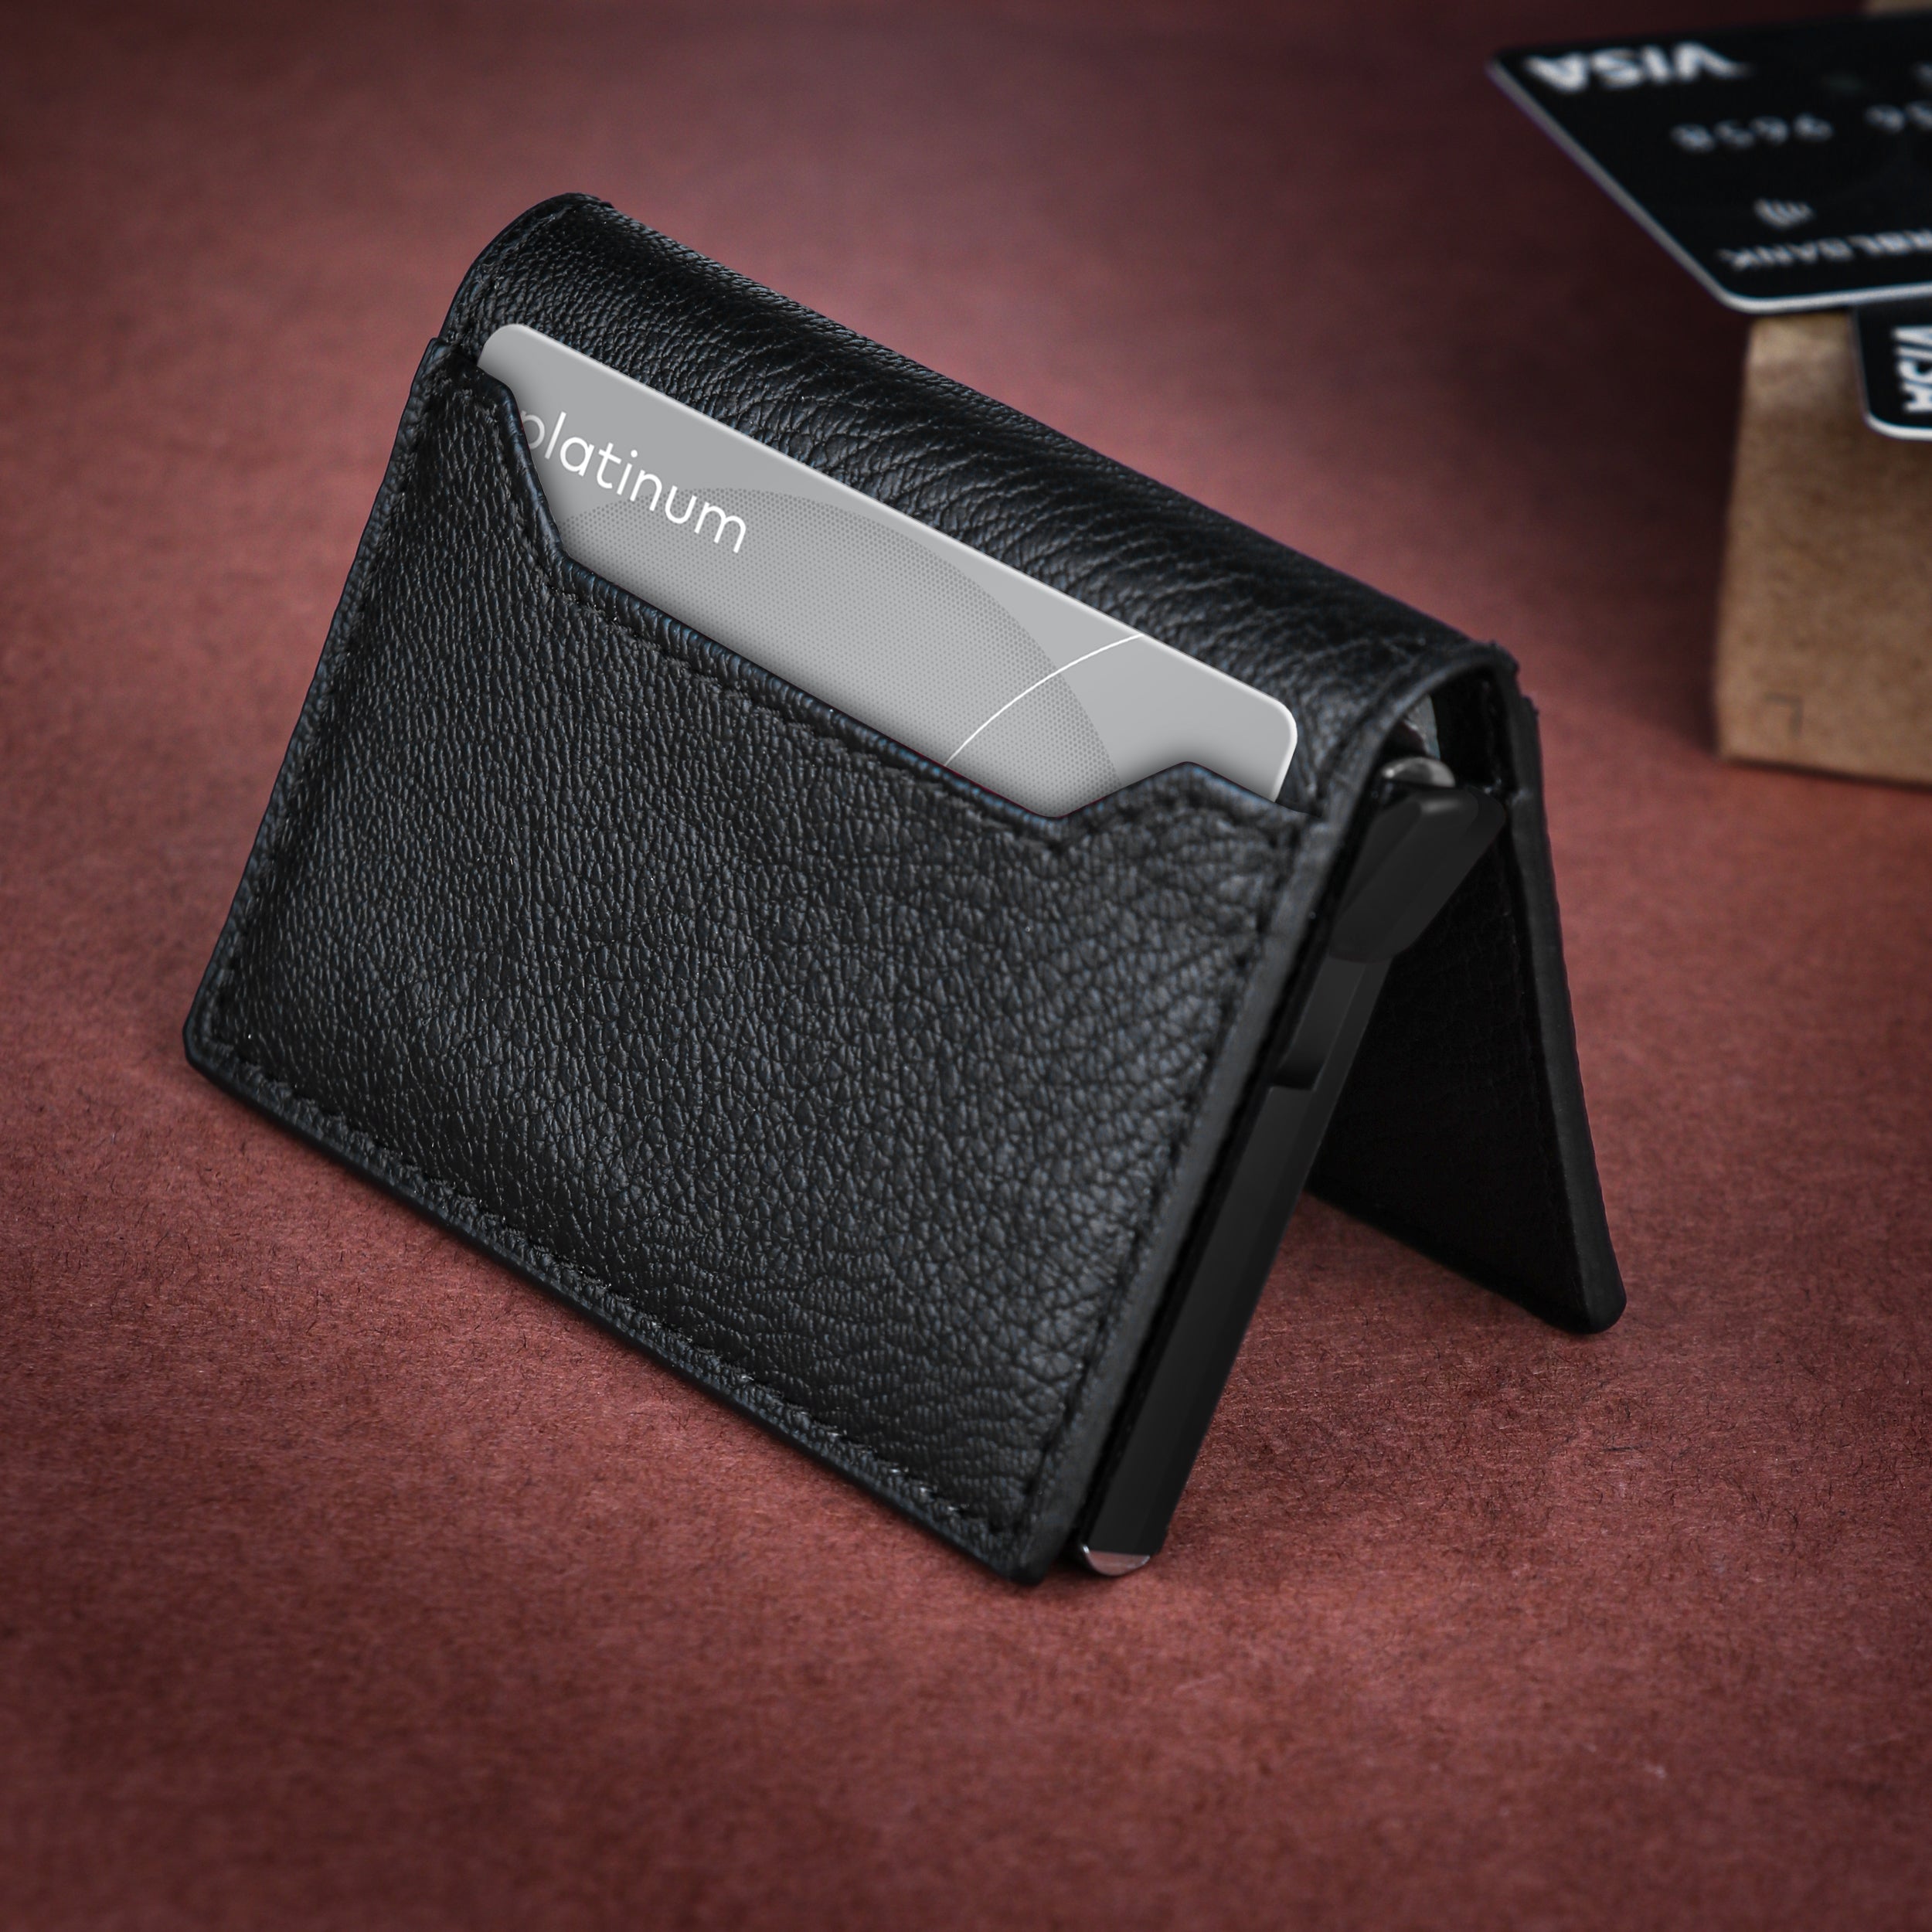 RFID Protected Metal Card Holder With Leather Cover